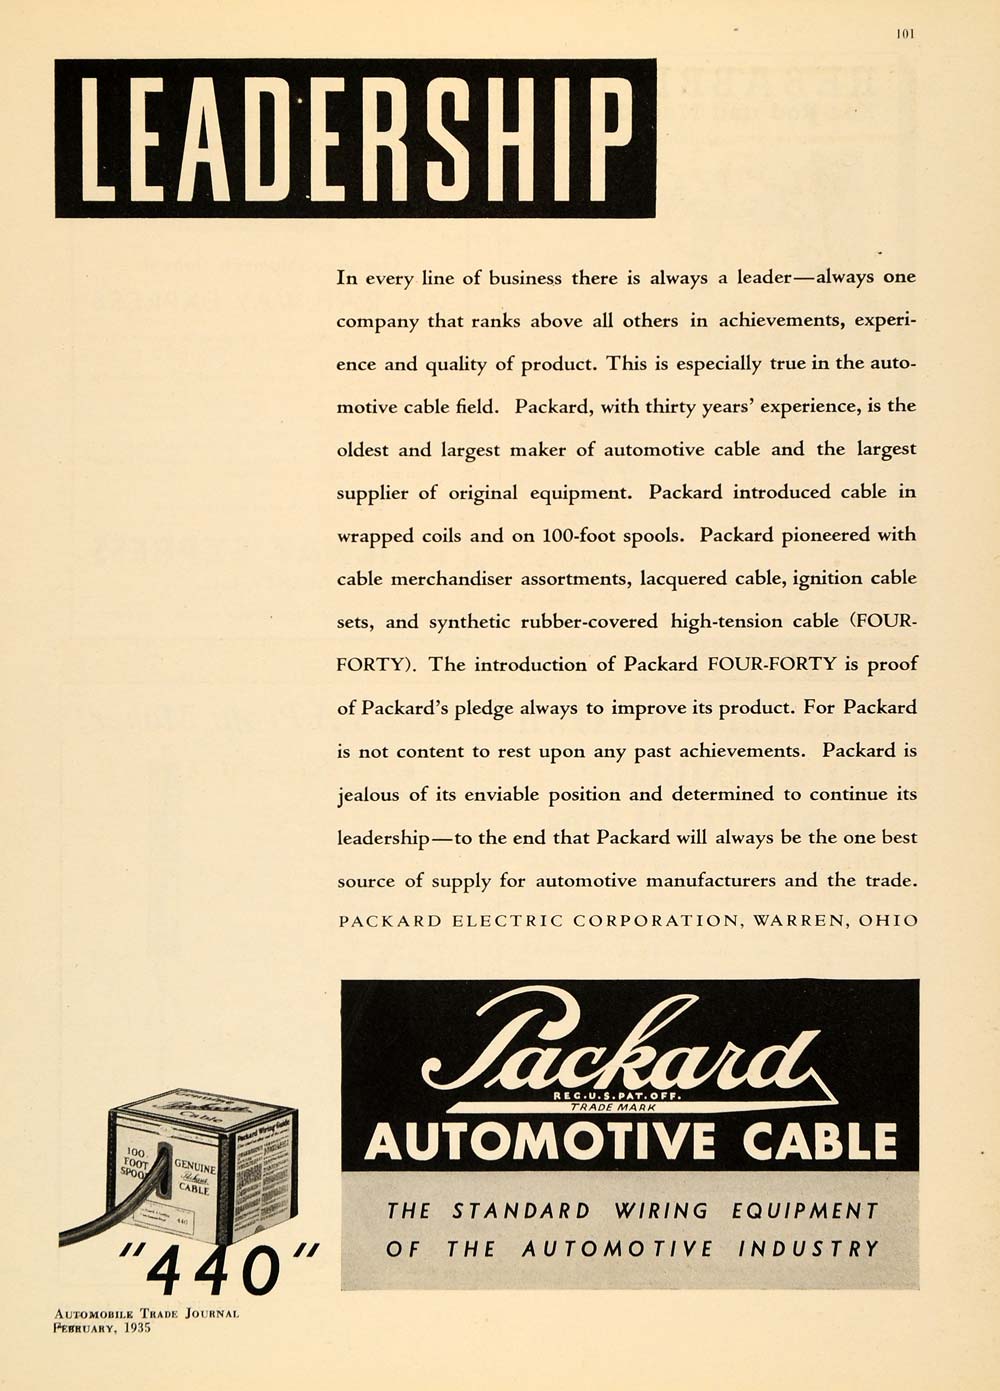 1935 Ad Packard Automotive Cable Wiring Equipment Parts - ORIGINAL ATJ1